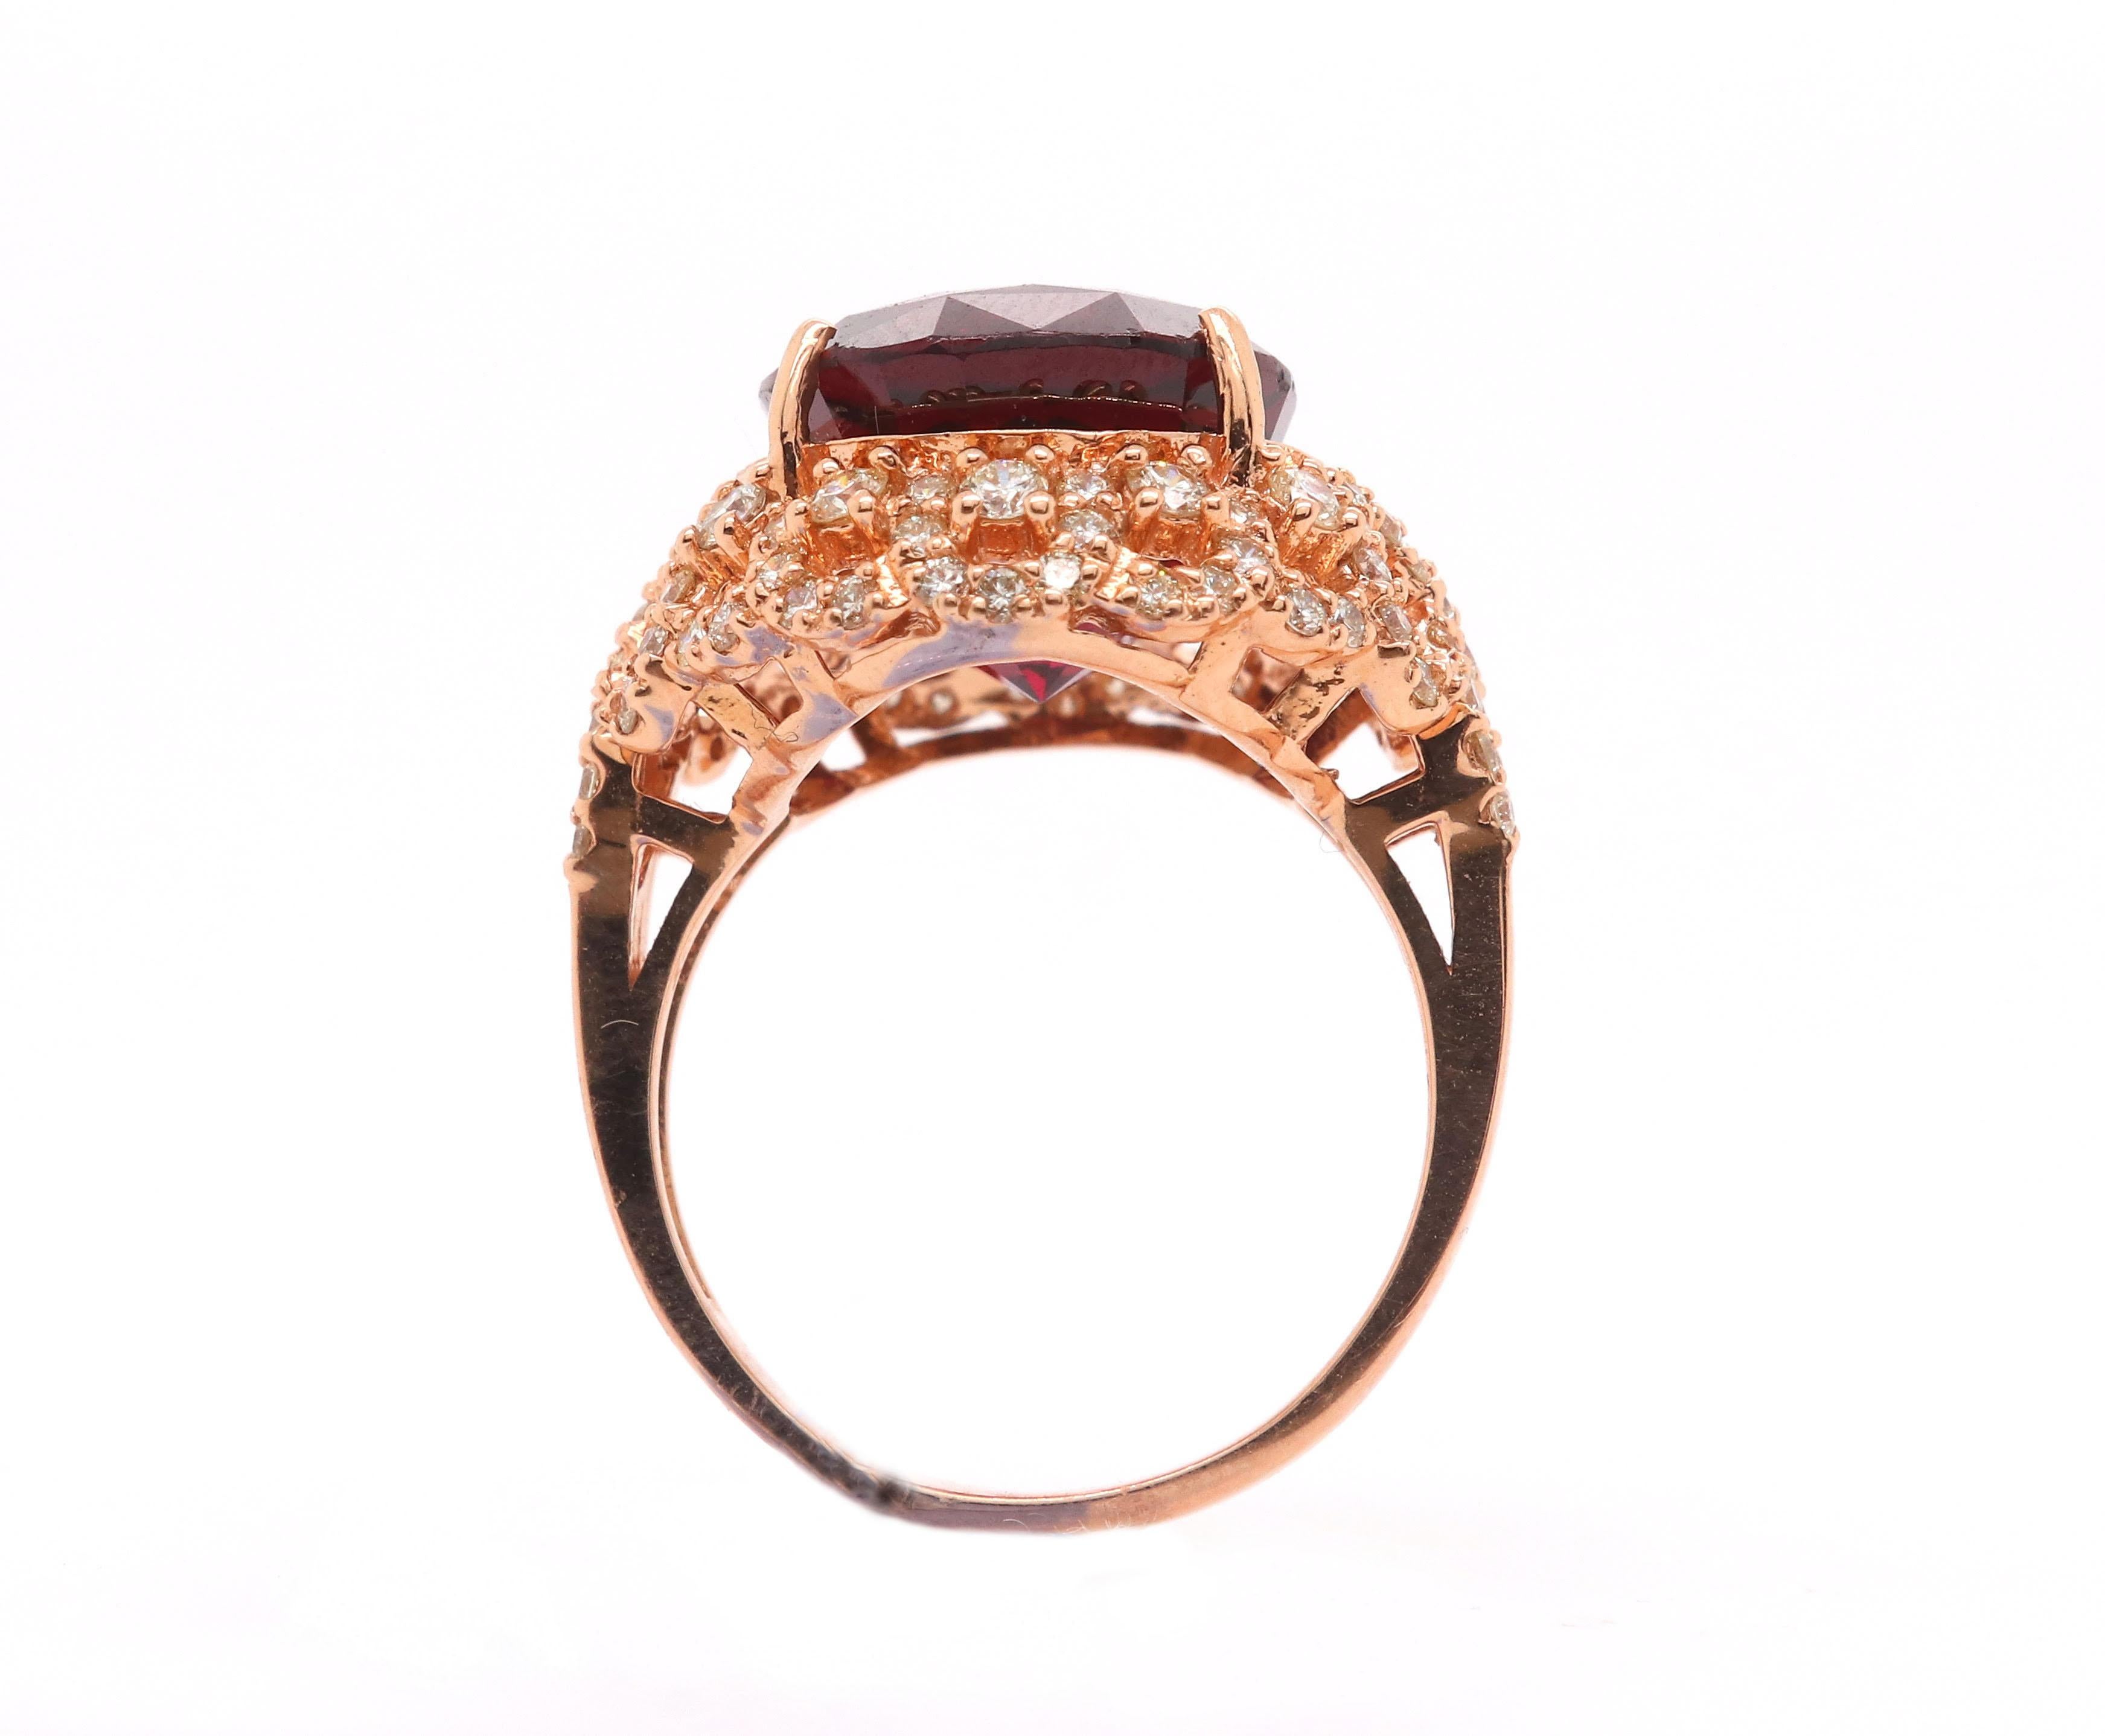 Contemporary 13.41 Carat Oval Rubellite and Diamond Ring